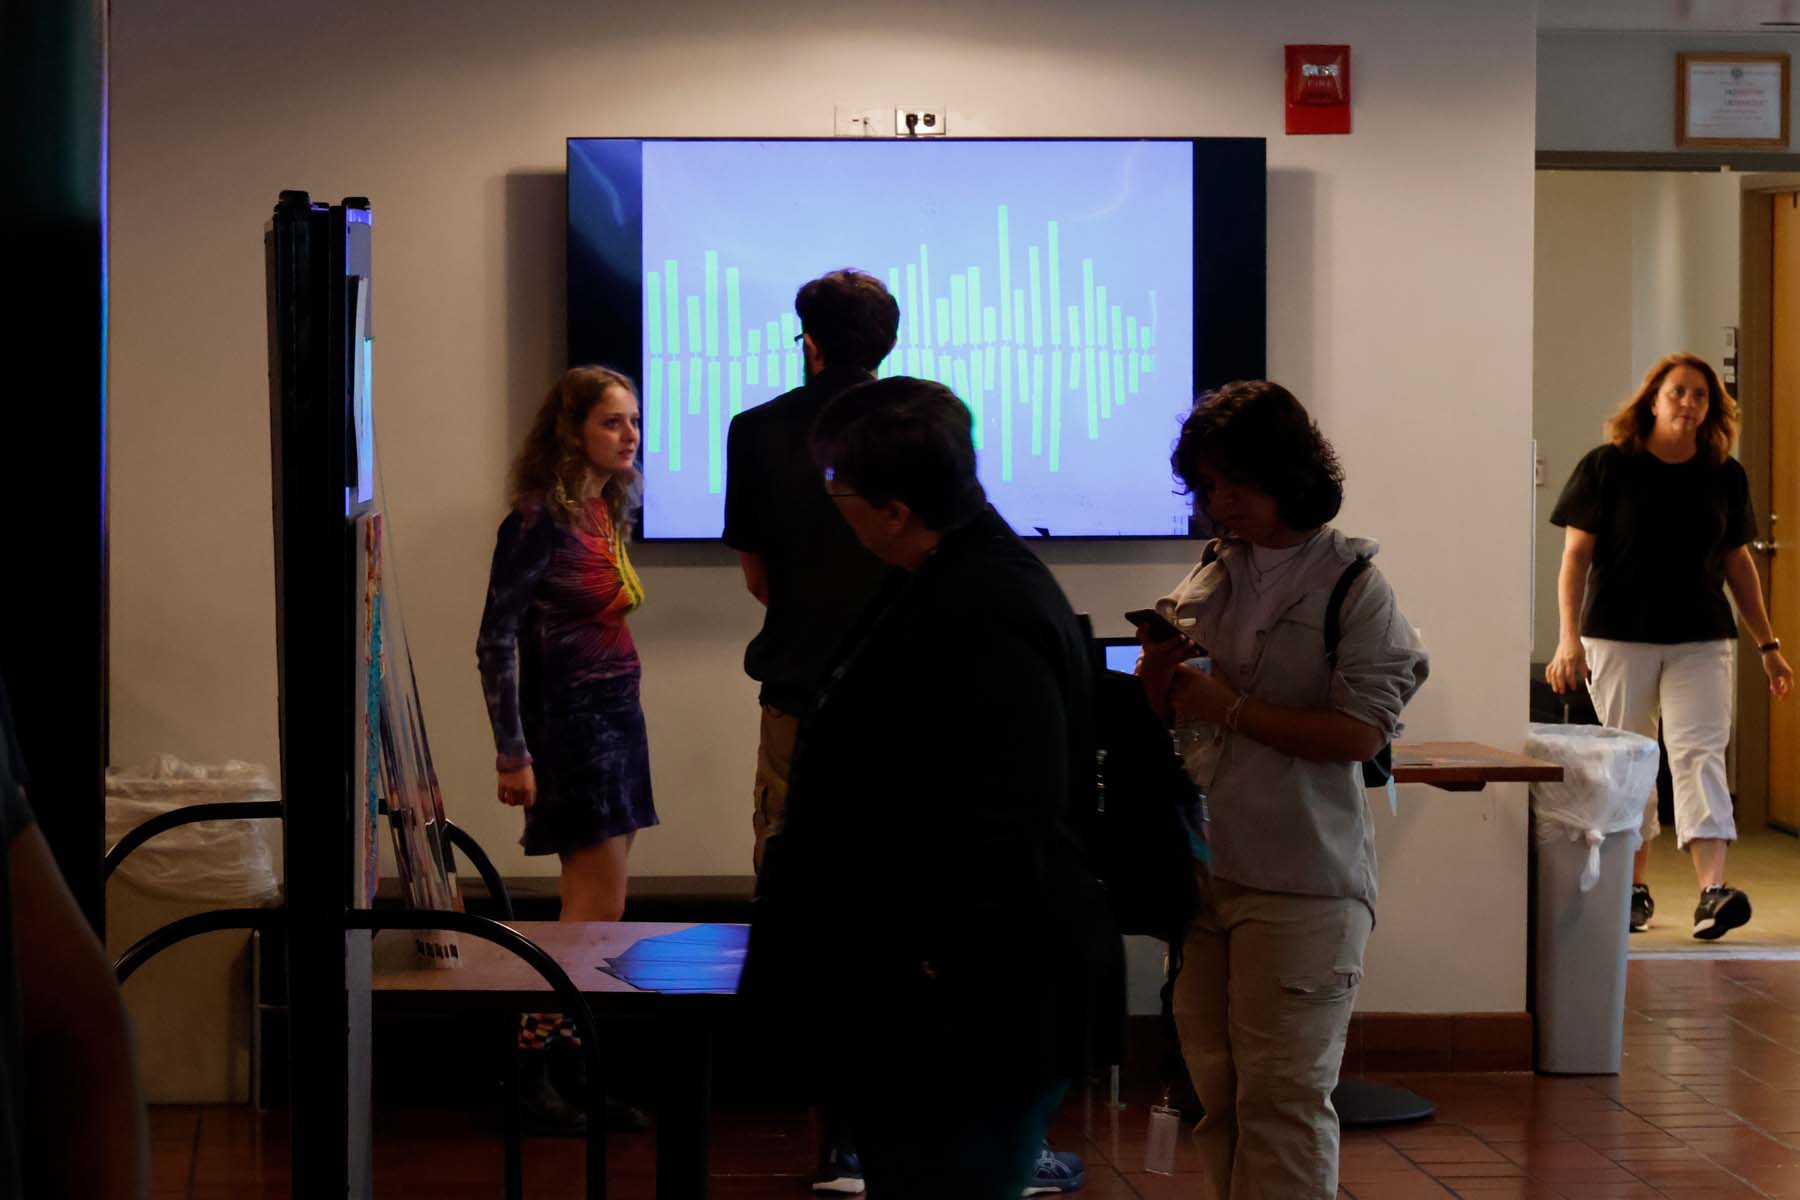 Three people examine a painting mounted to the while, while in the background a man looks inquistively at a screen displaying a waveform.